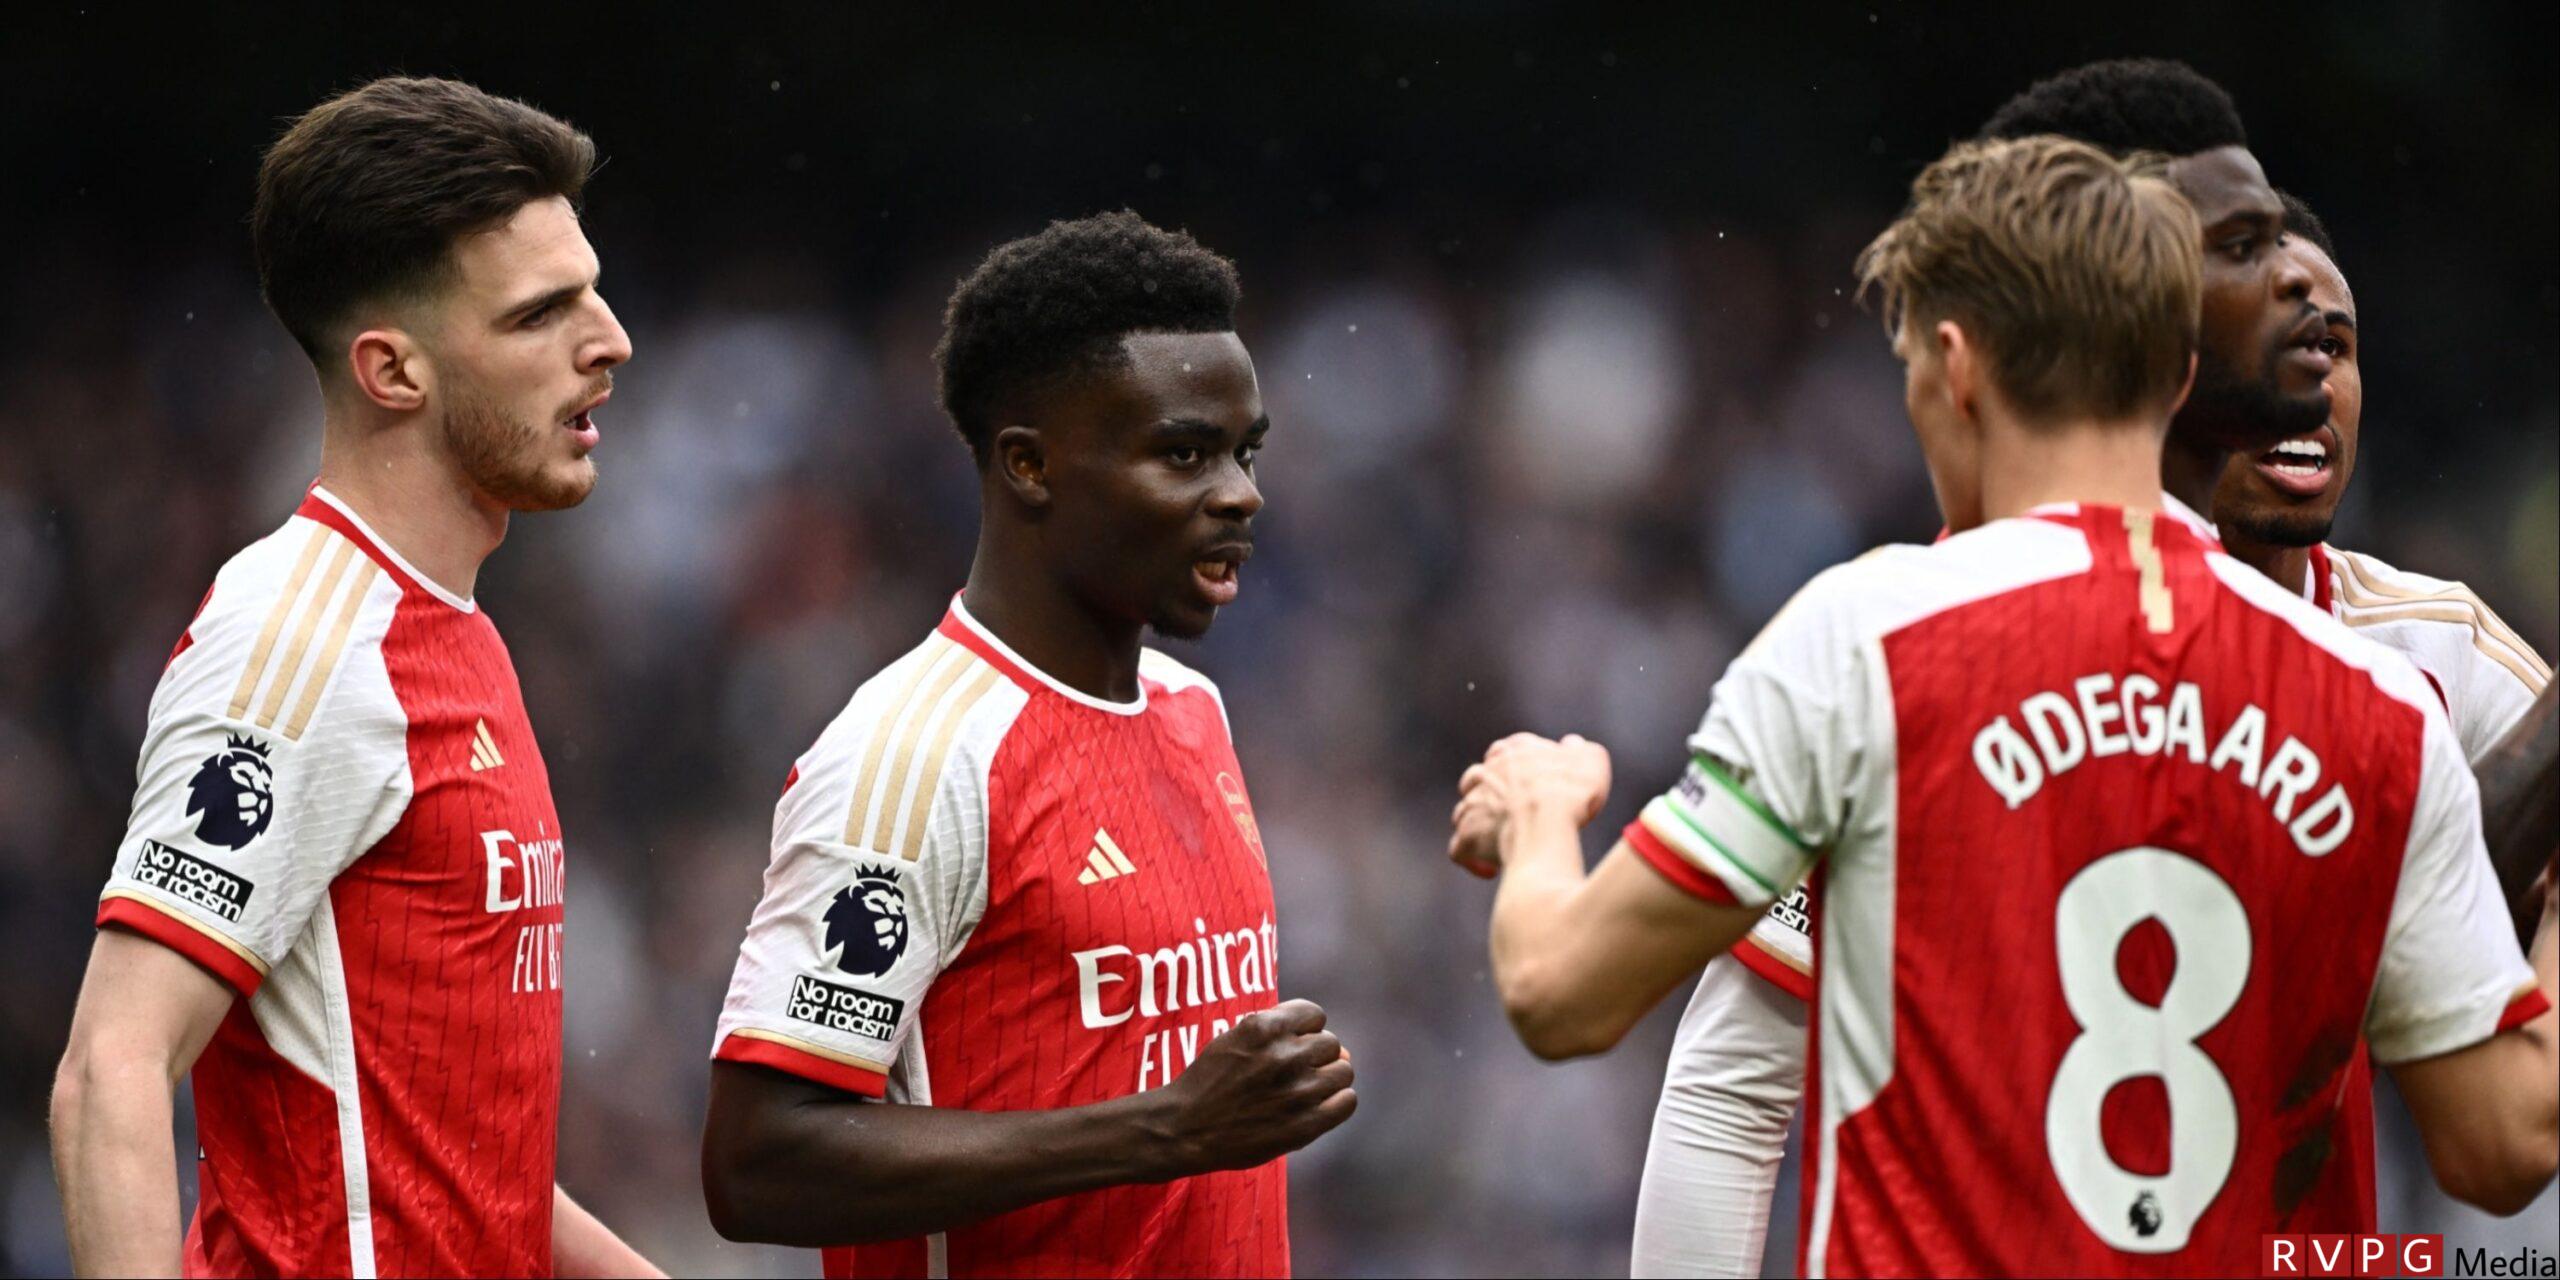 Forget Saka and Havertz: Arsenal star with 100% dribbling dominated Spurs